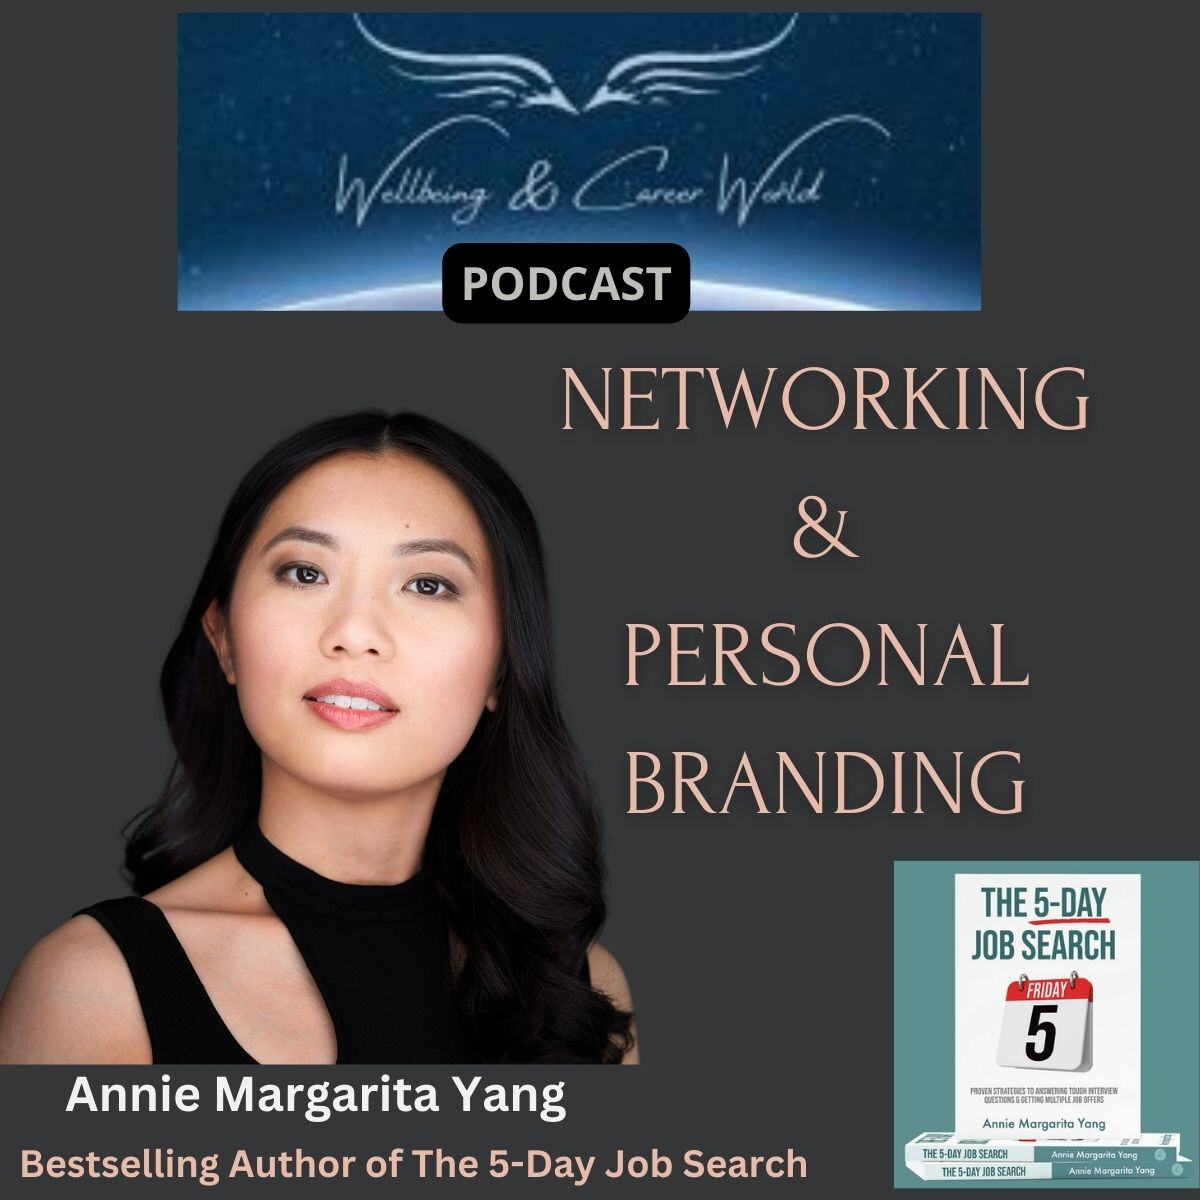 Networking & Personal Branding with Bestselling Author of The 5-Day Job Search Annie Margarita Yang